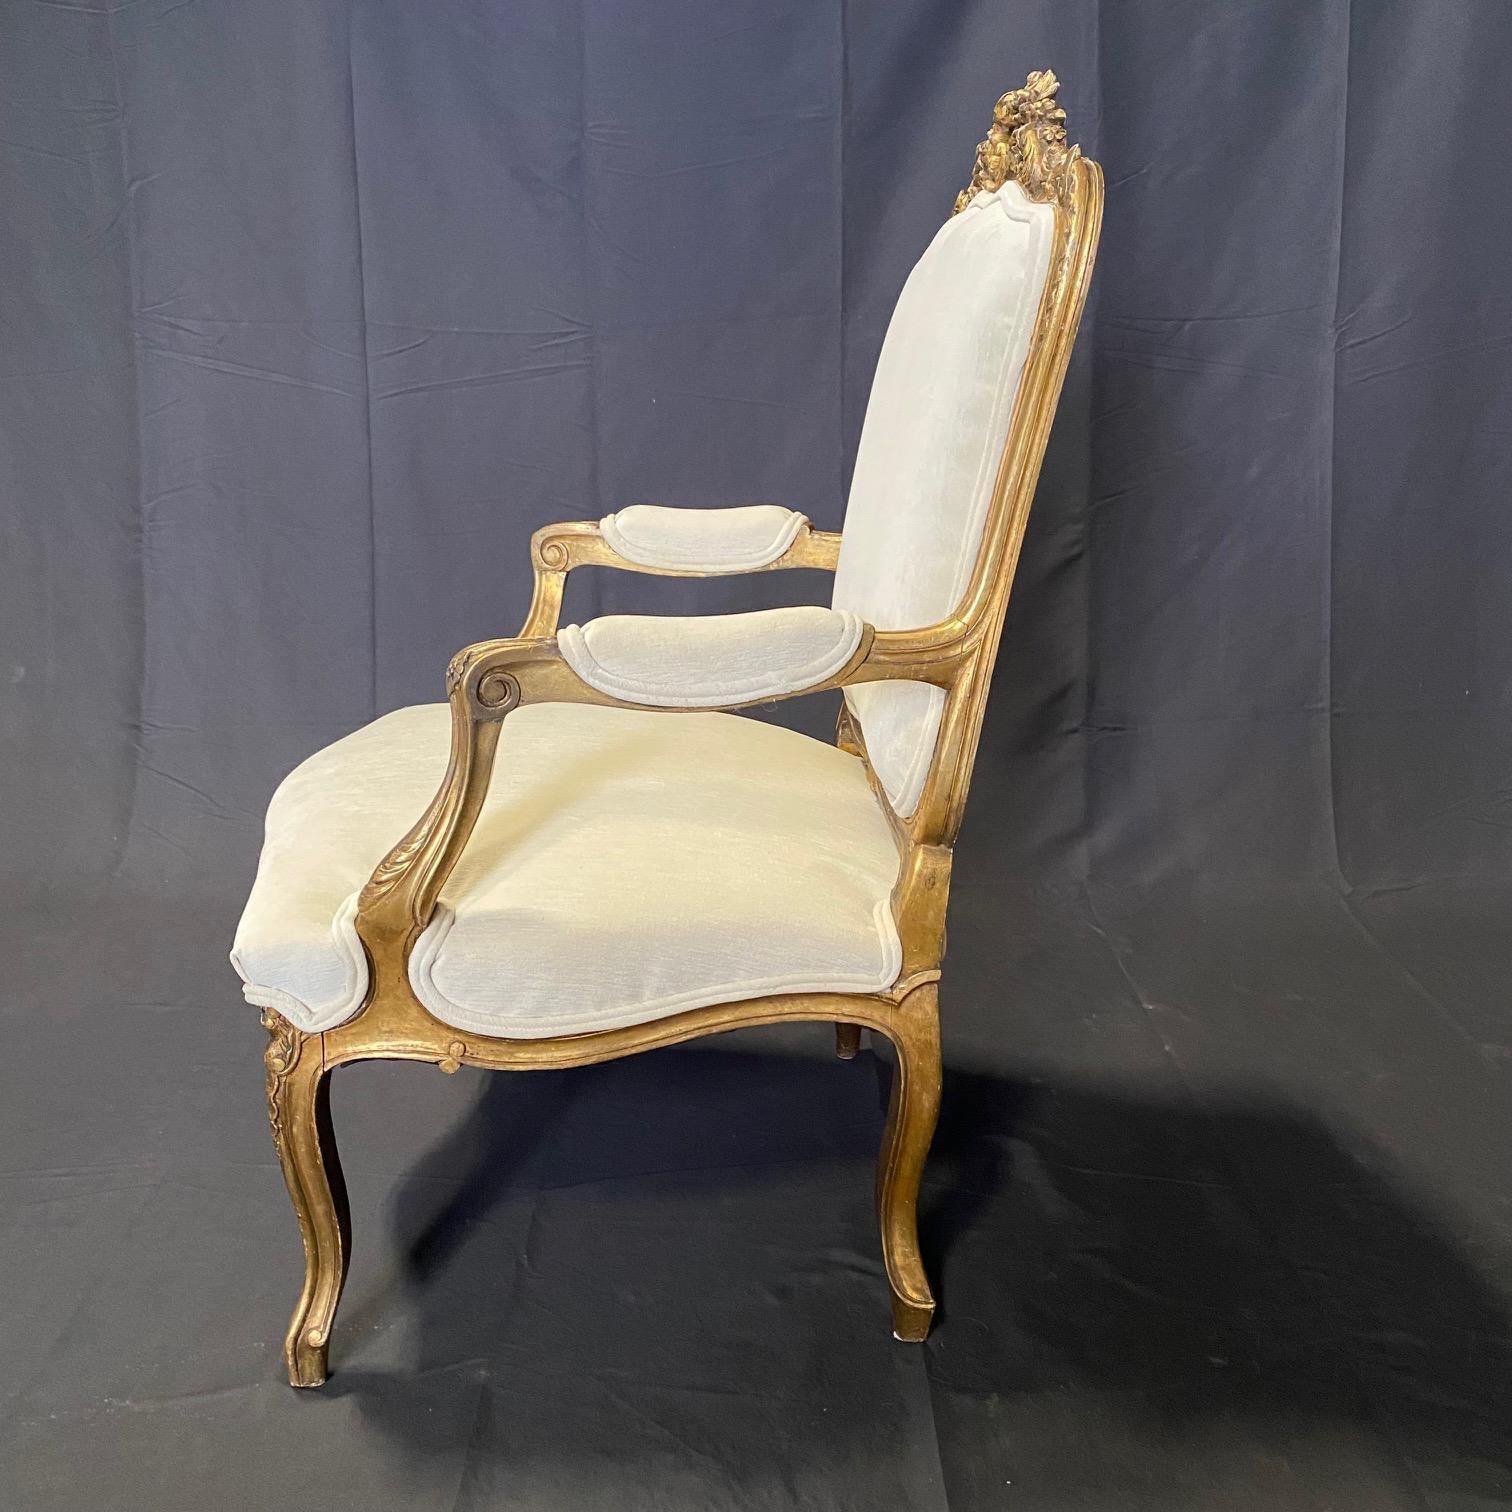  Pair of Antique French Louis XV Fauteuil Gilded Arm Chairs  For Sale 4